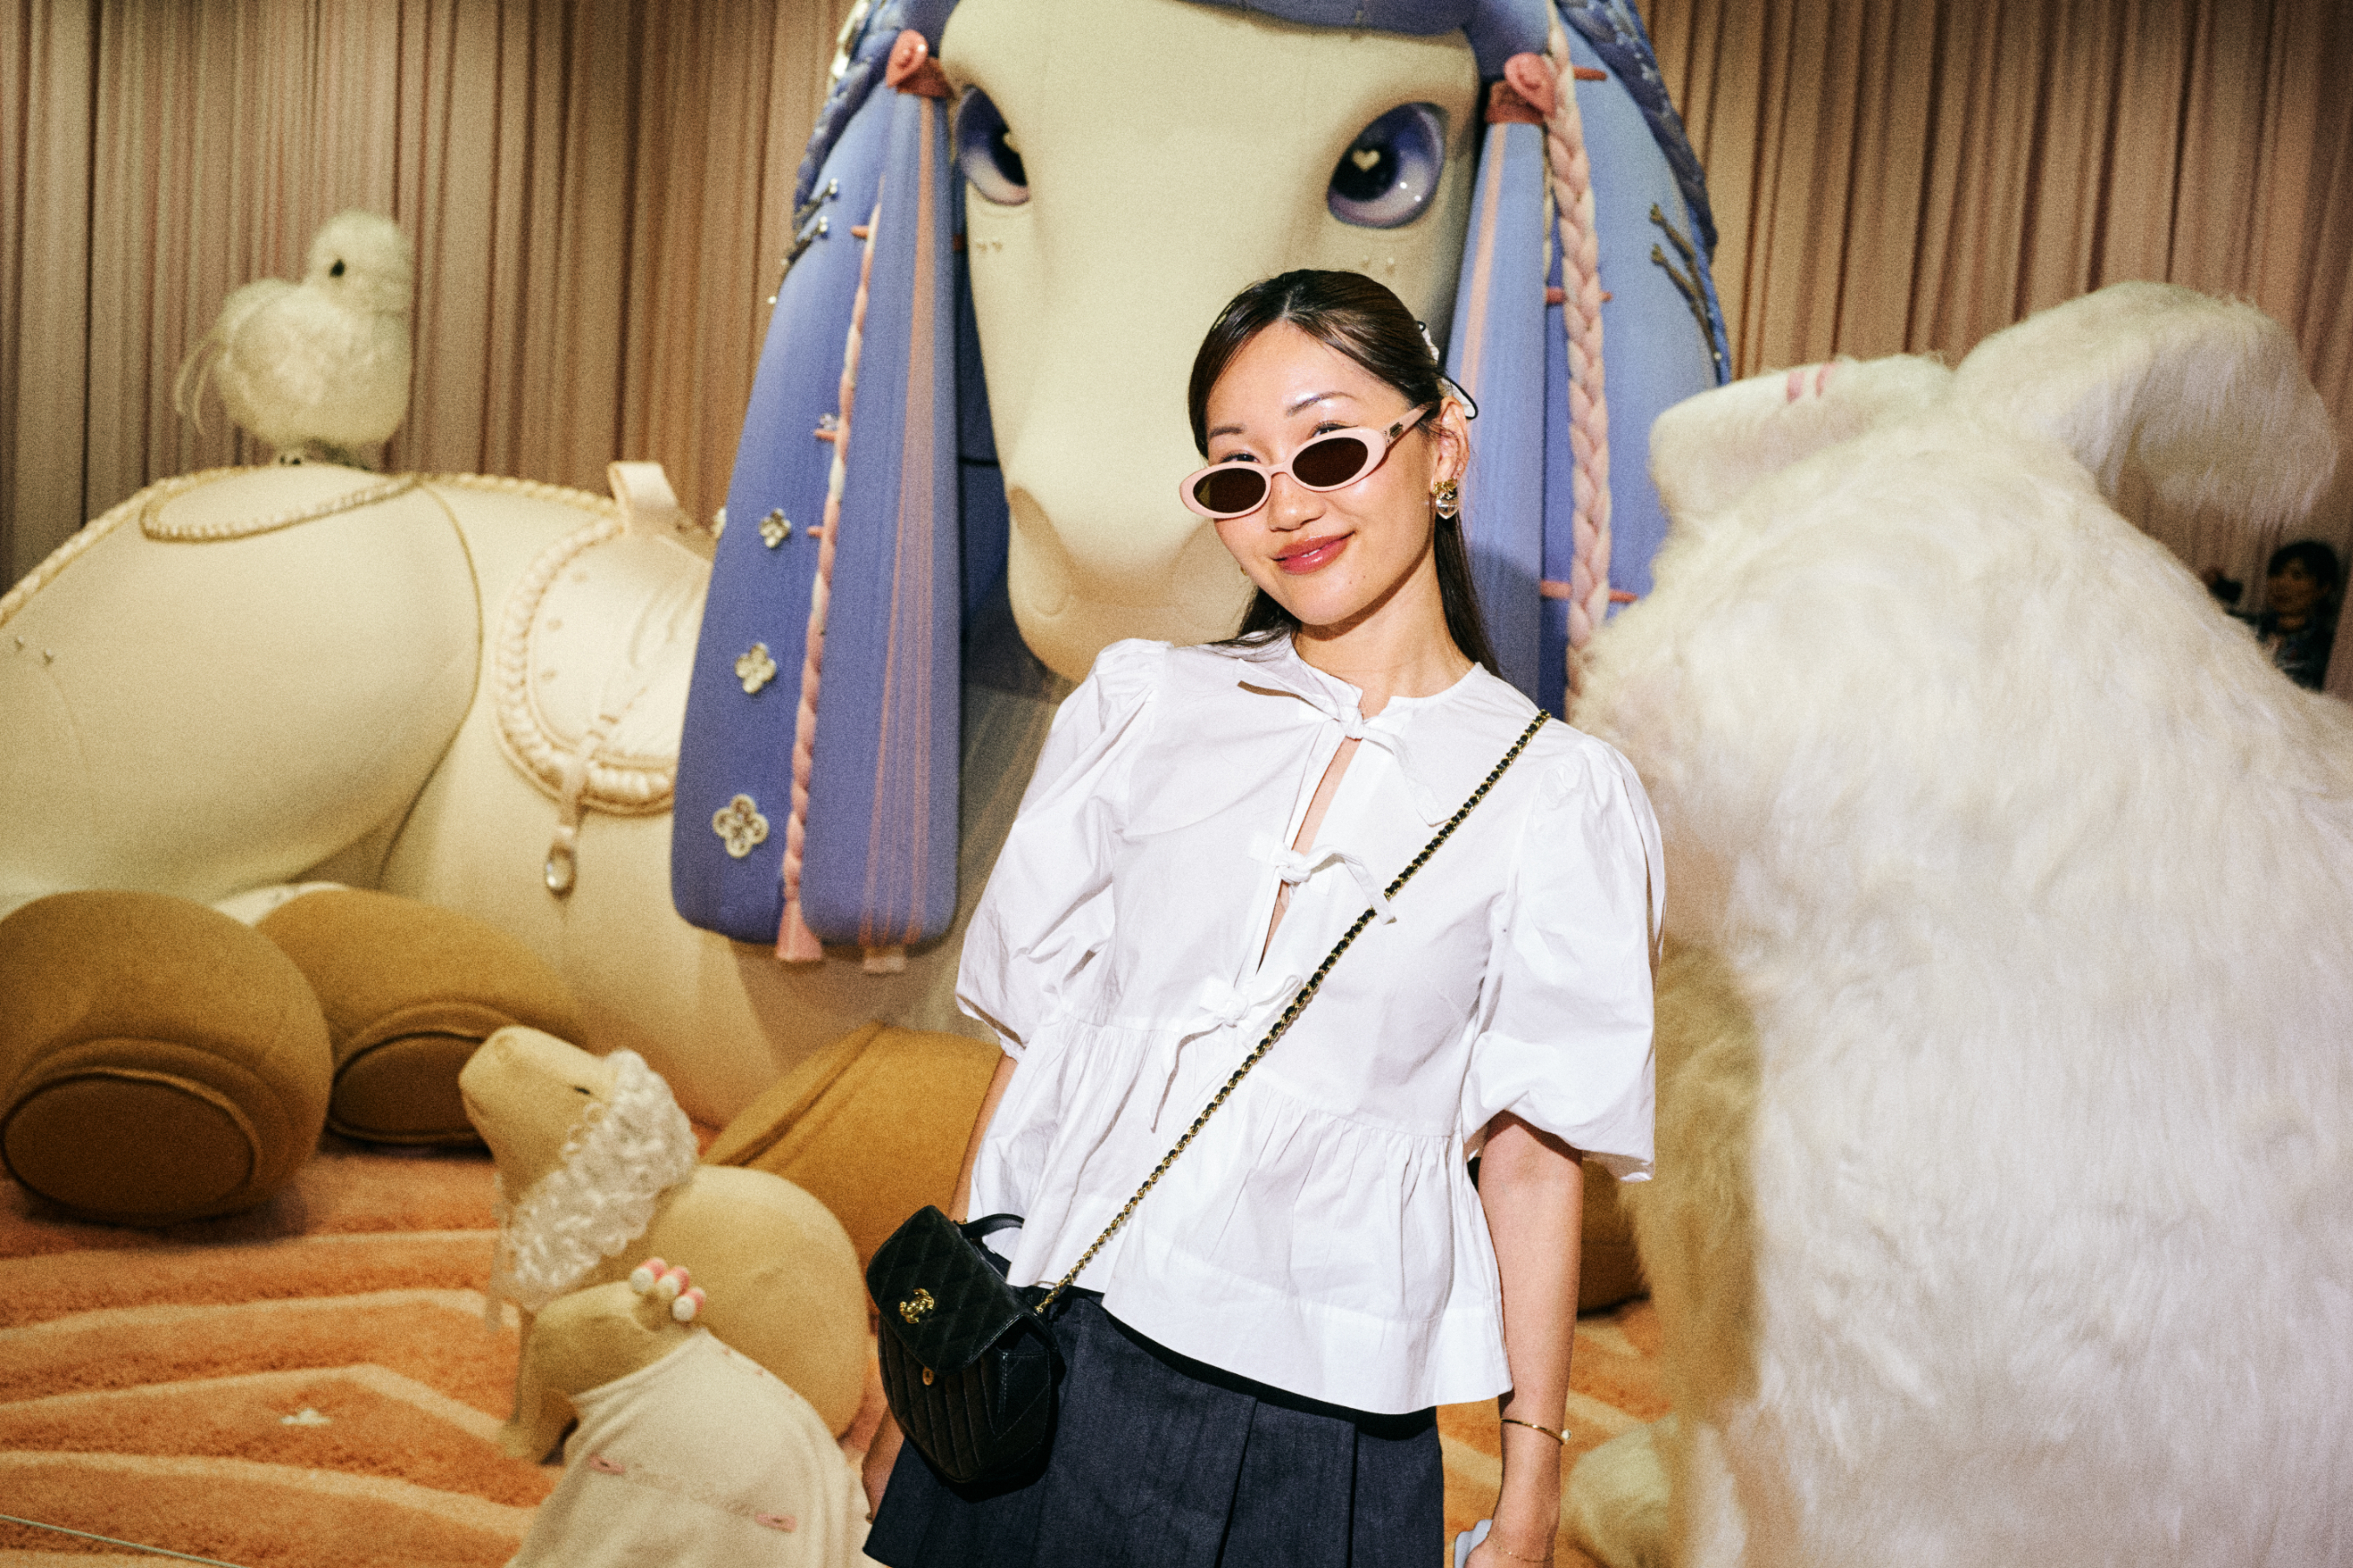 Woman poses in a ruffled white blouse and dark skirt, with plush toys in the background